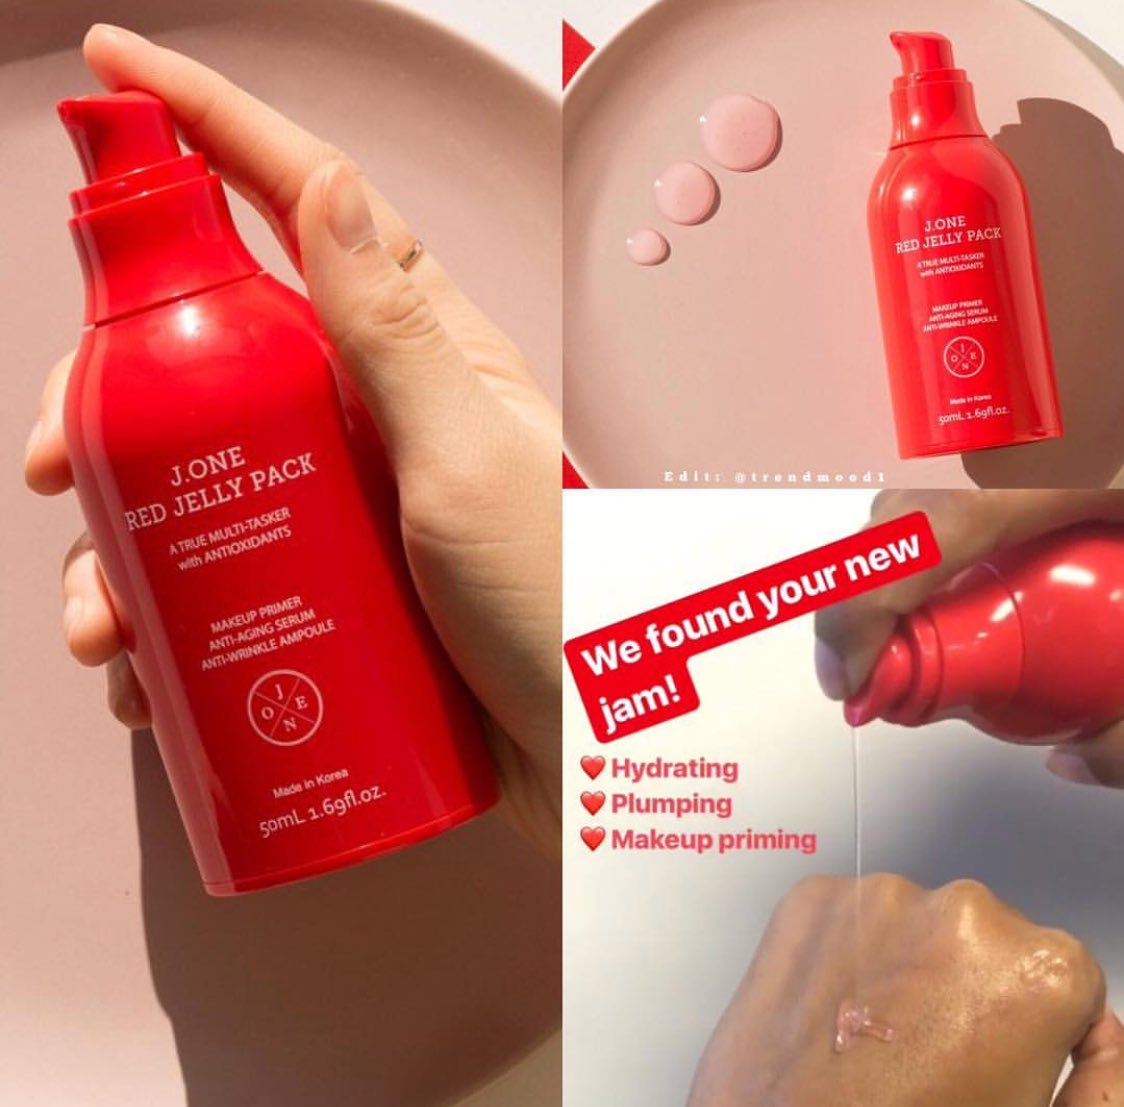 Trendmood Di Twitter New Product By Glowrecipe J One Red Jelly Pack An Ampoule And Primer In One This Rosy Hued Multitasker Instantly Boosts Skin S Natural Anti Aging Powers While Simultaneously